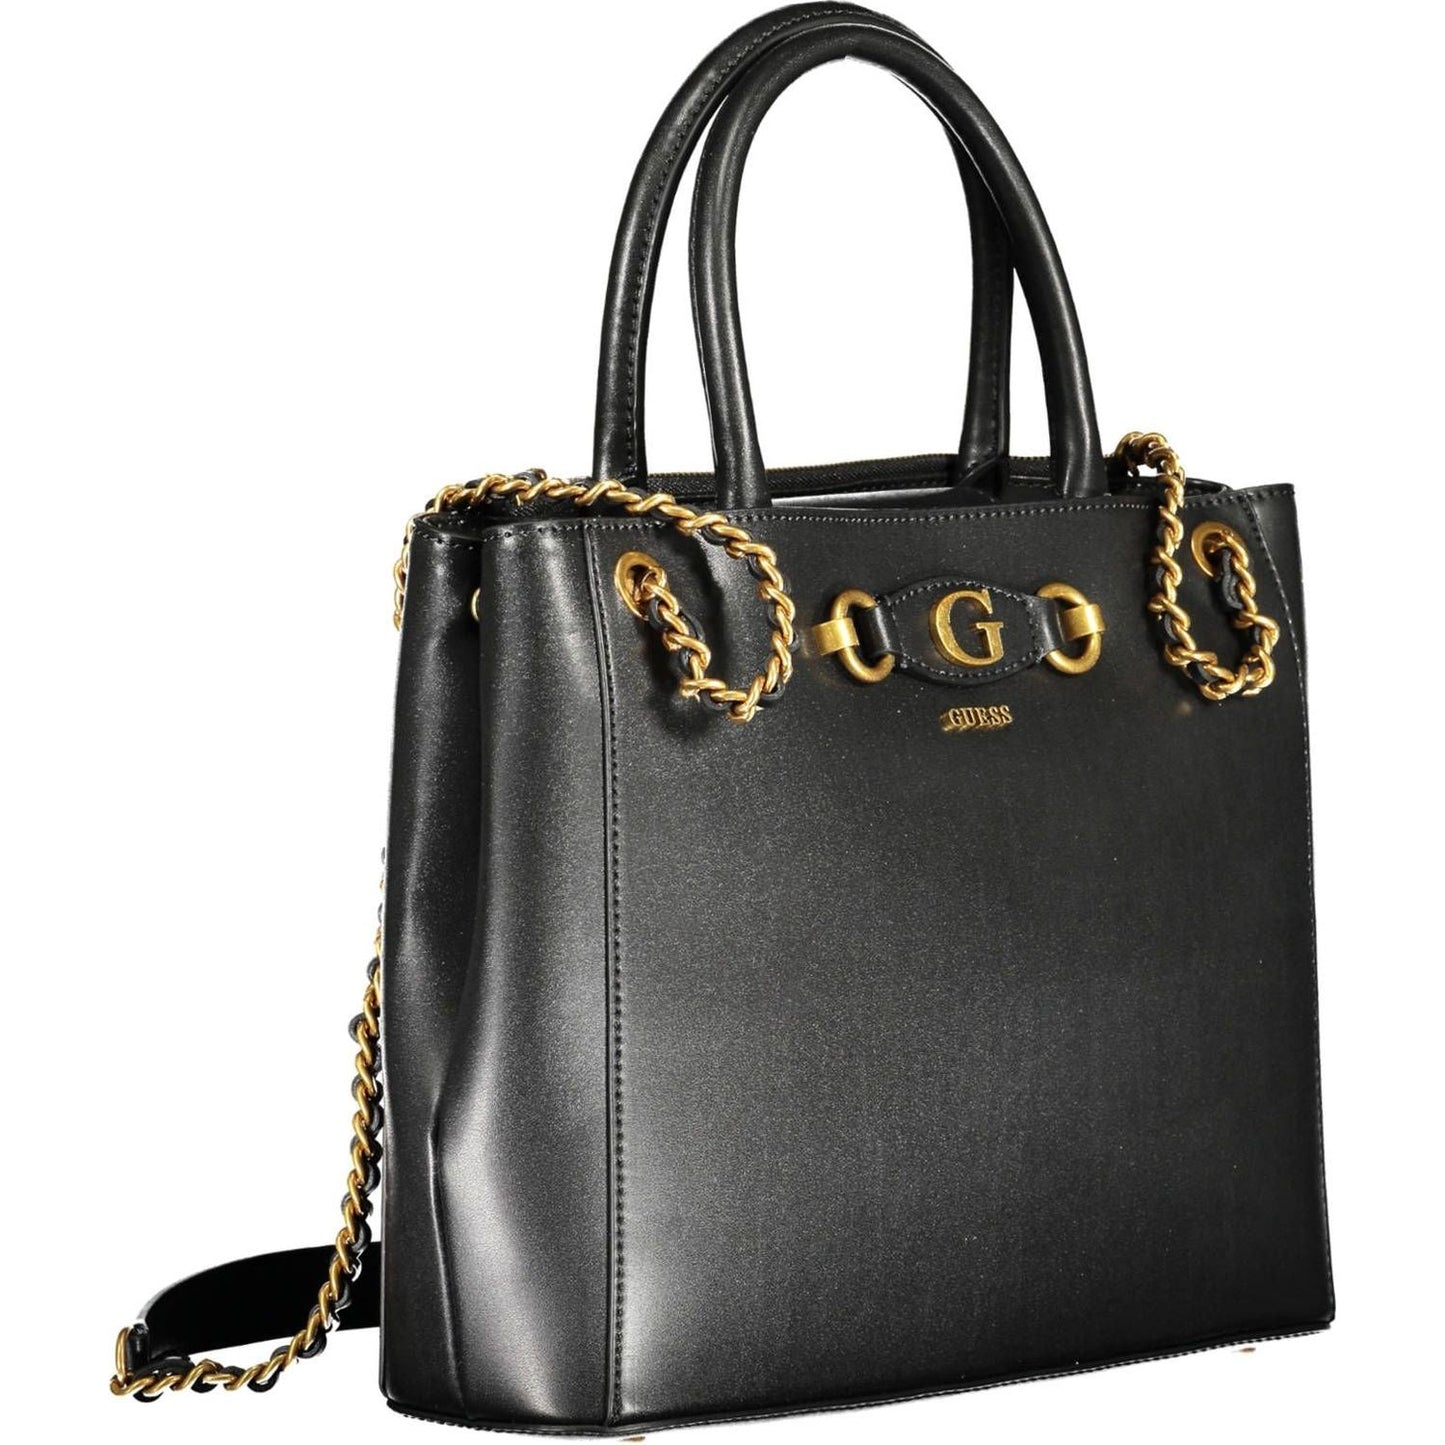 Guess Jeans Elegant Two-Tone Chain Handle Handbag elegant-two-tone-chain-handle-handbag